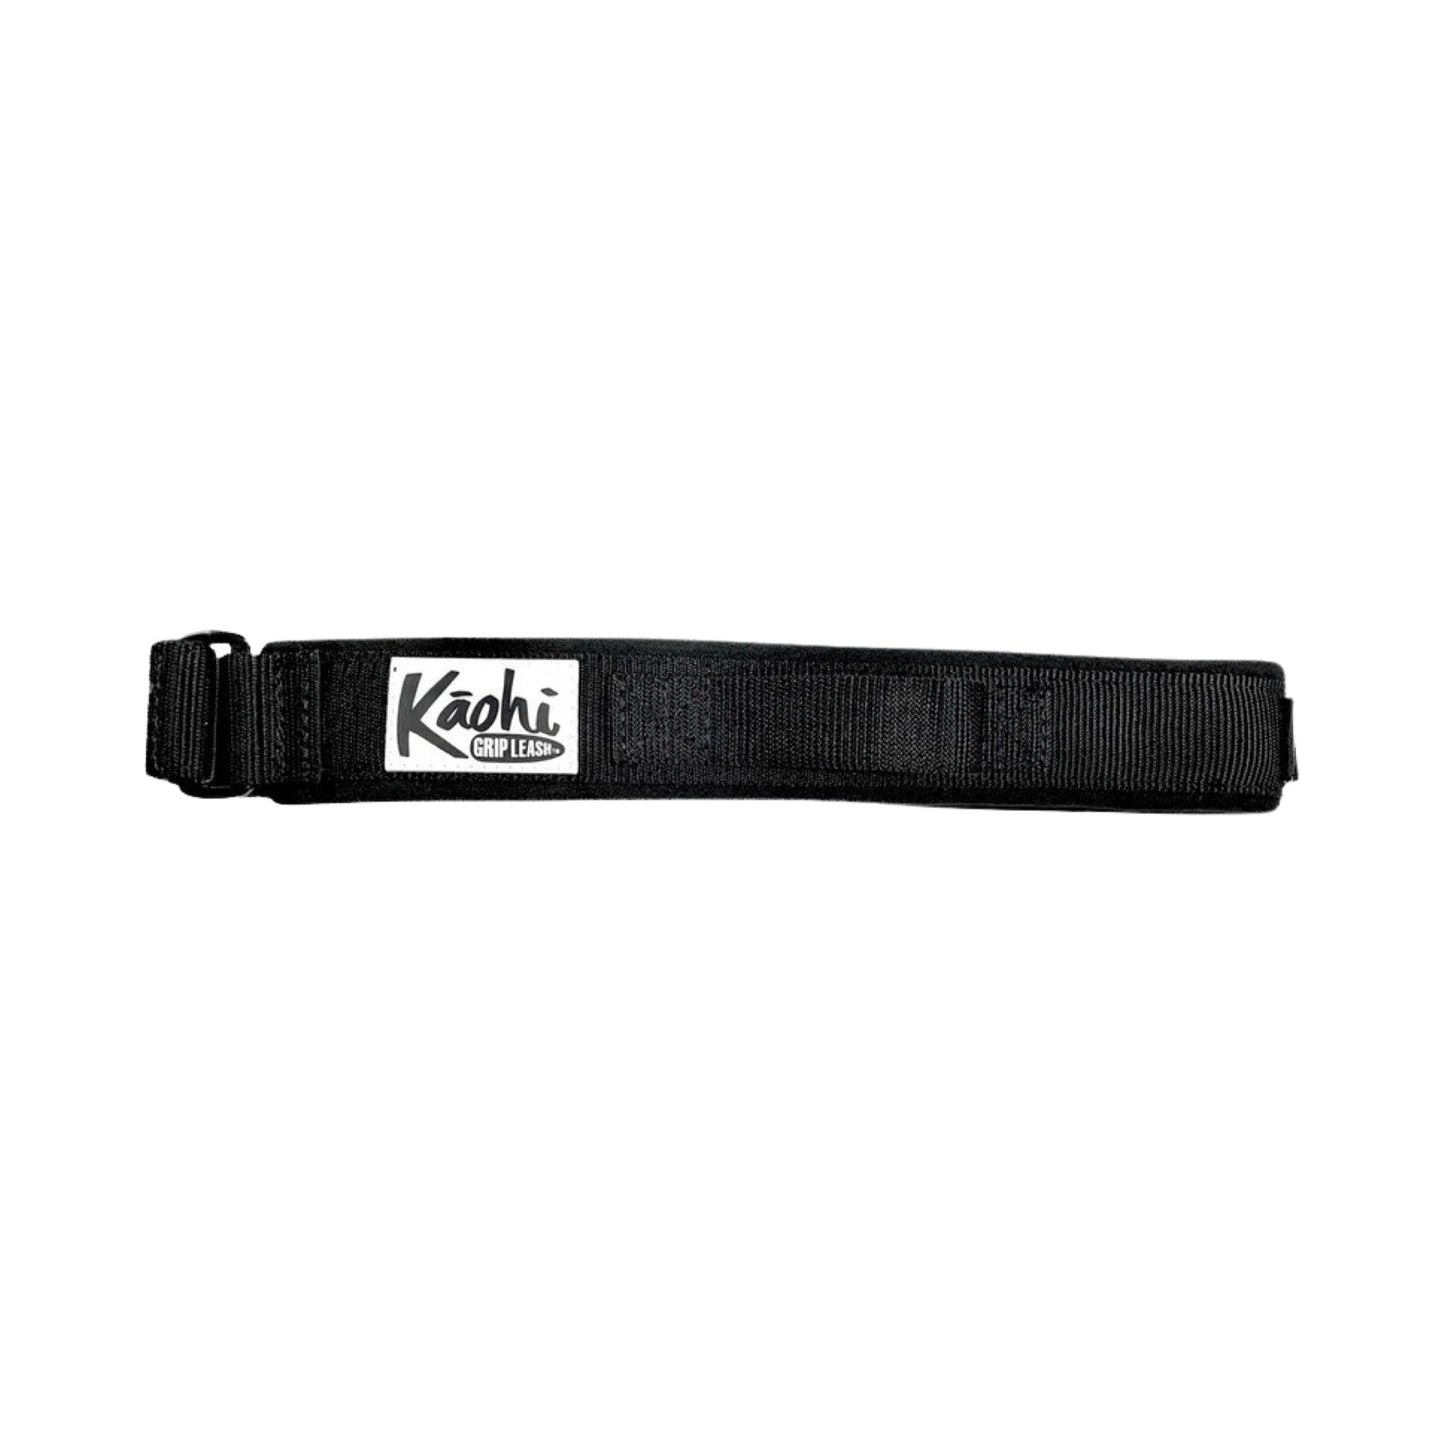 Kaohi Padded Belt -DISCONTINUED Replaced by COBRA FOIL Waist BELT